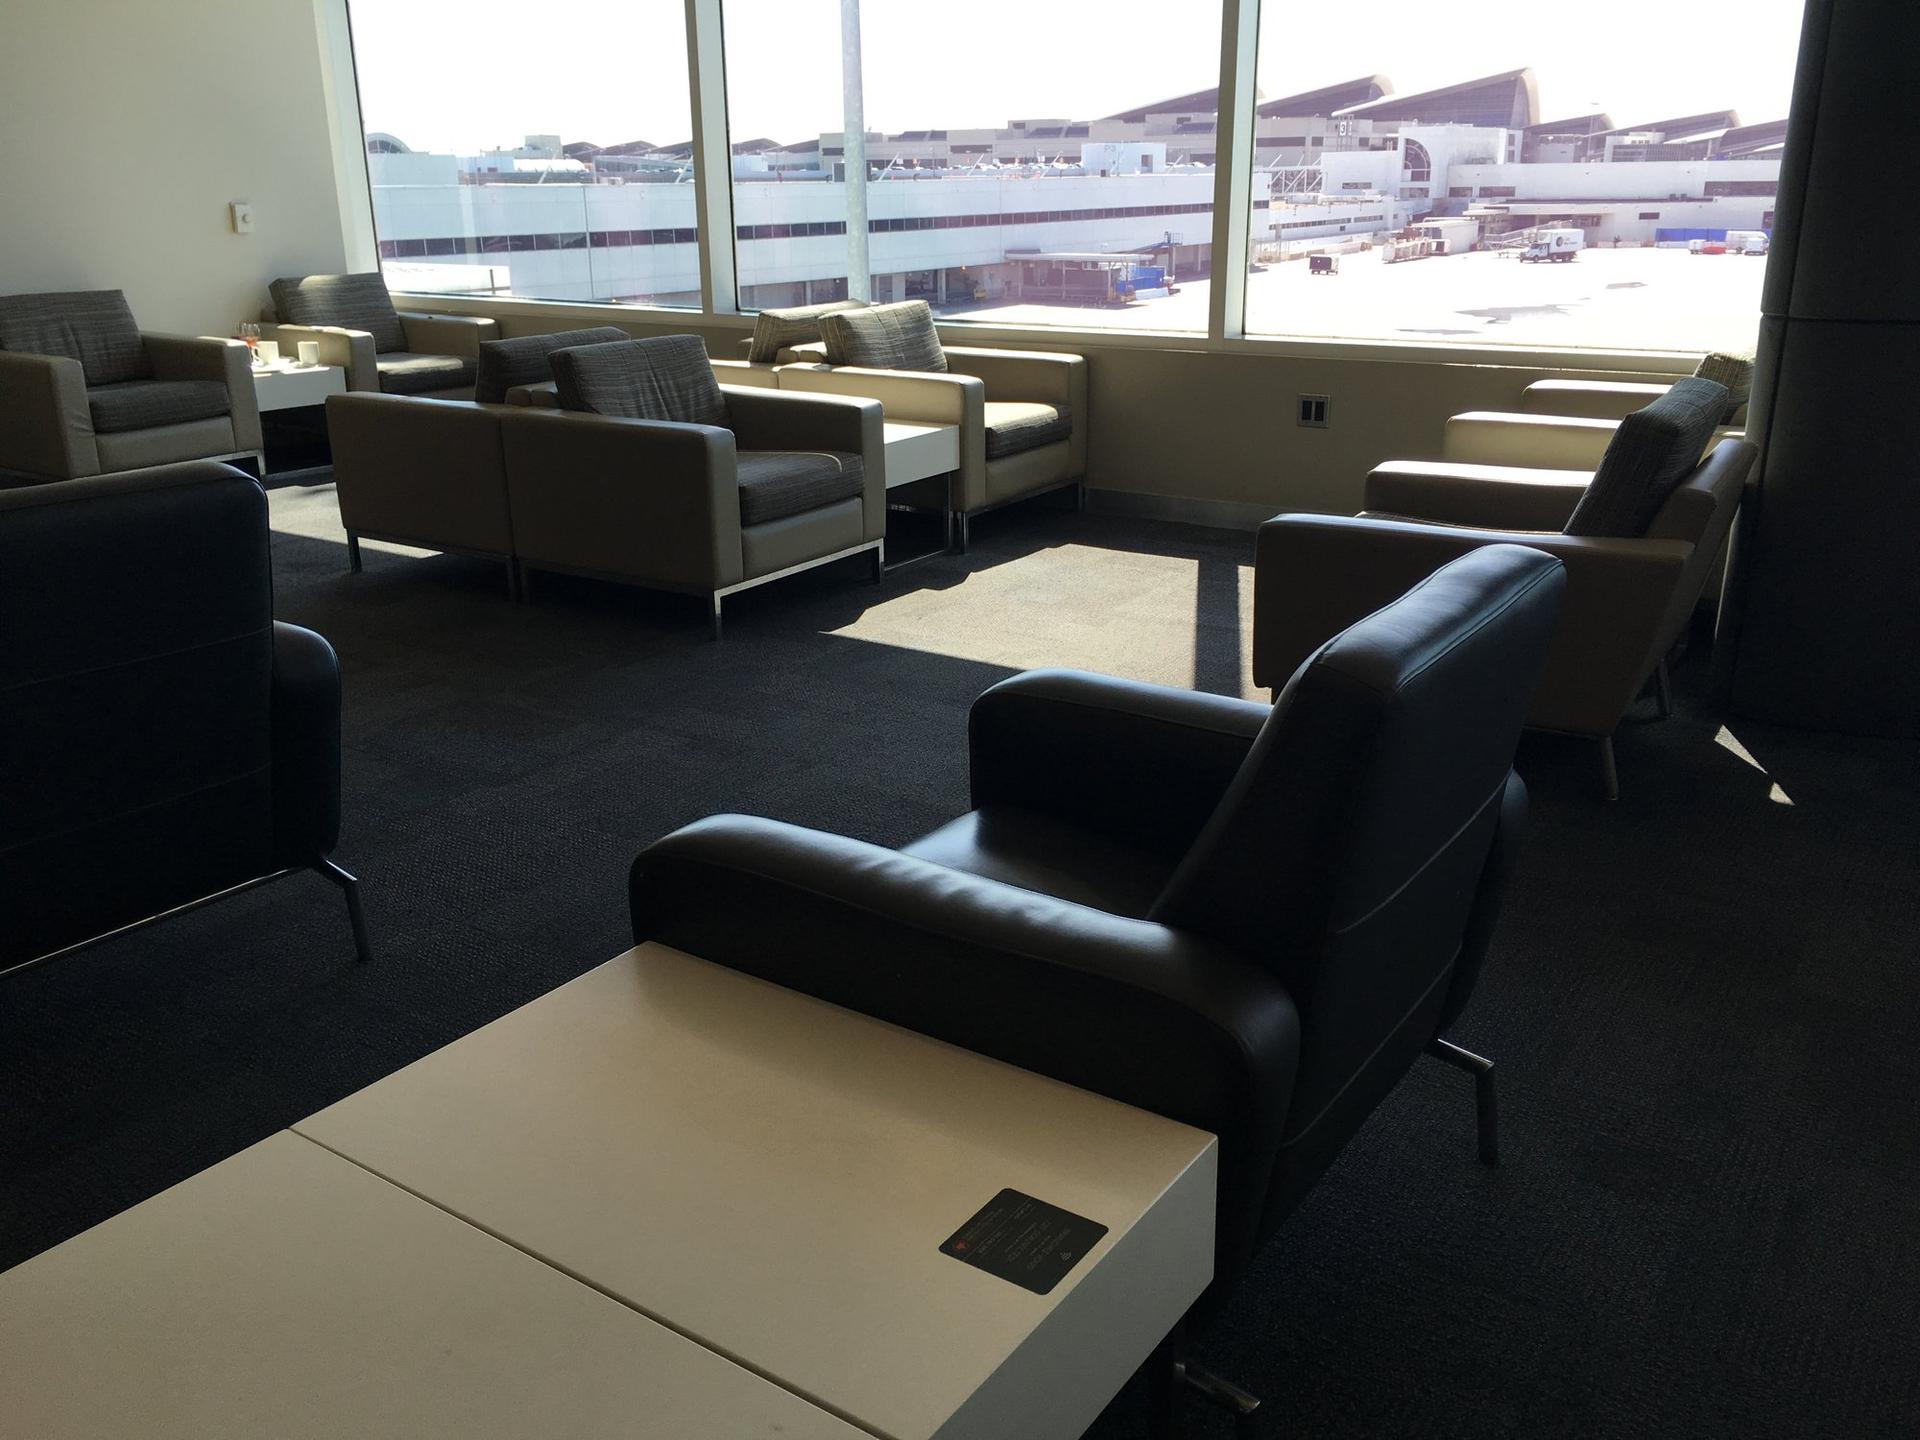 Air Canada Maple Leaf Lounge image 13 of 24